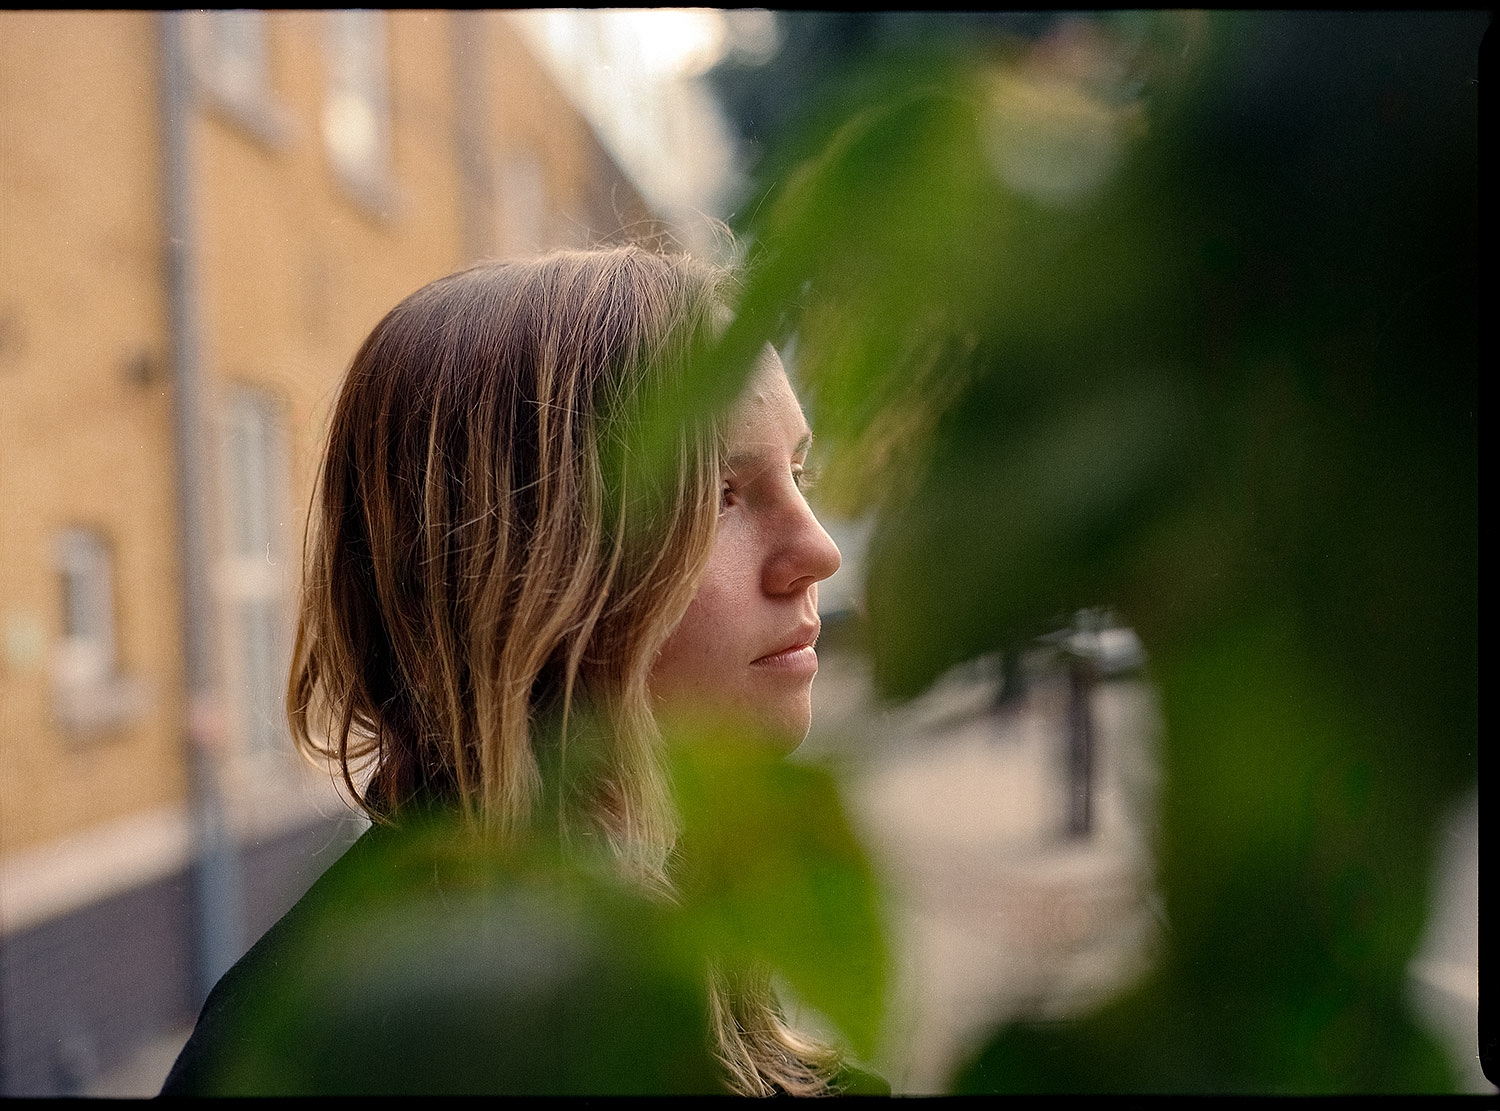 The Japanese House: Making Waves